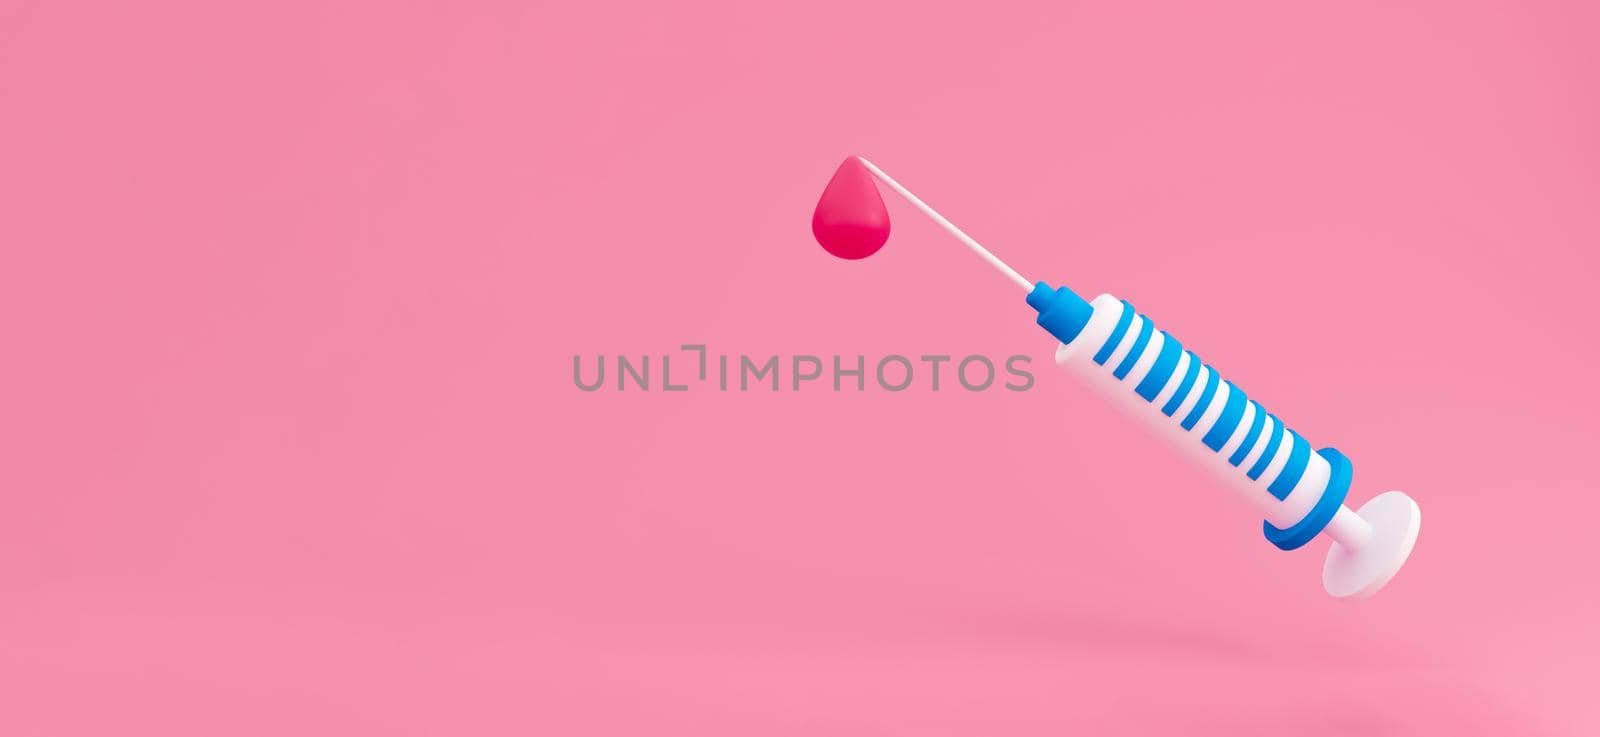 3d Syringe for vaccine, vaccination, injection, flu shot. Vaccination icon with Medical equipment. Minimalism concept. 3d illustration render with copy space